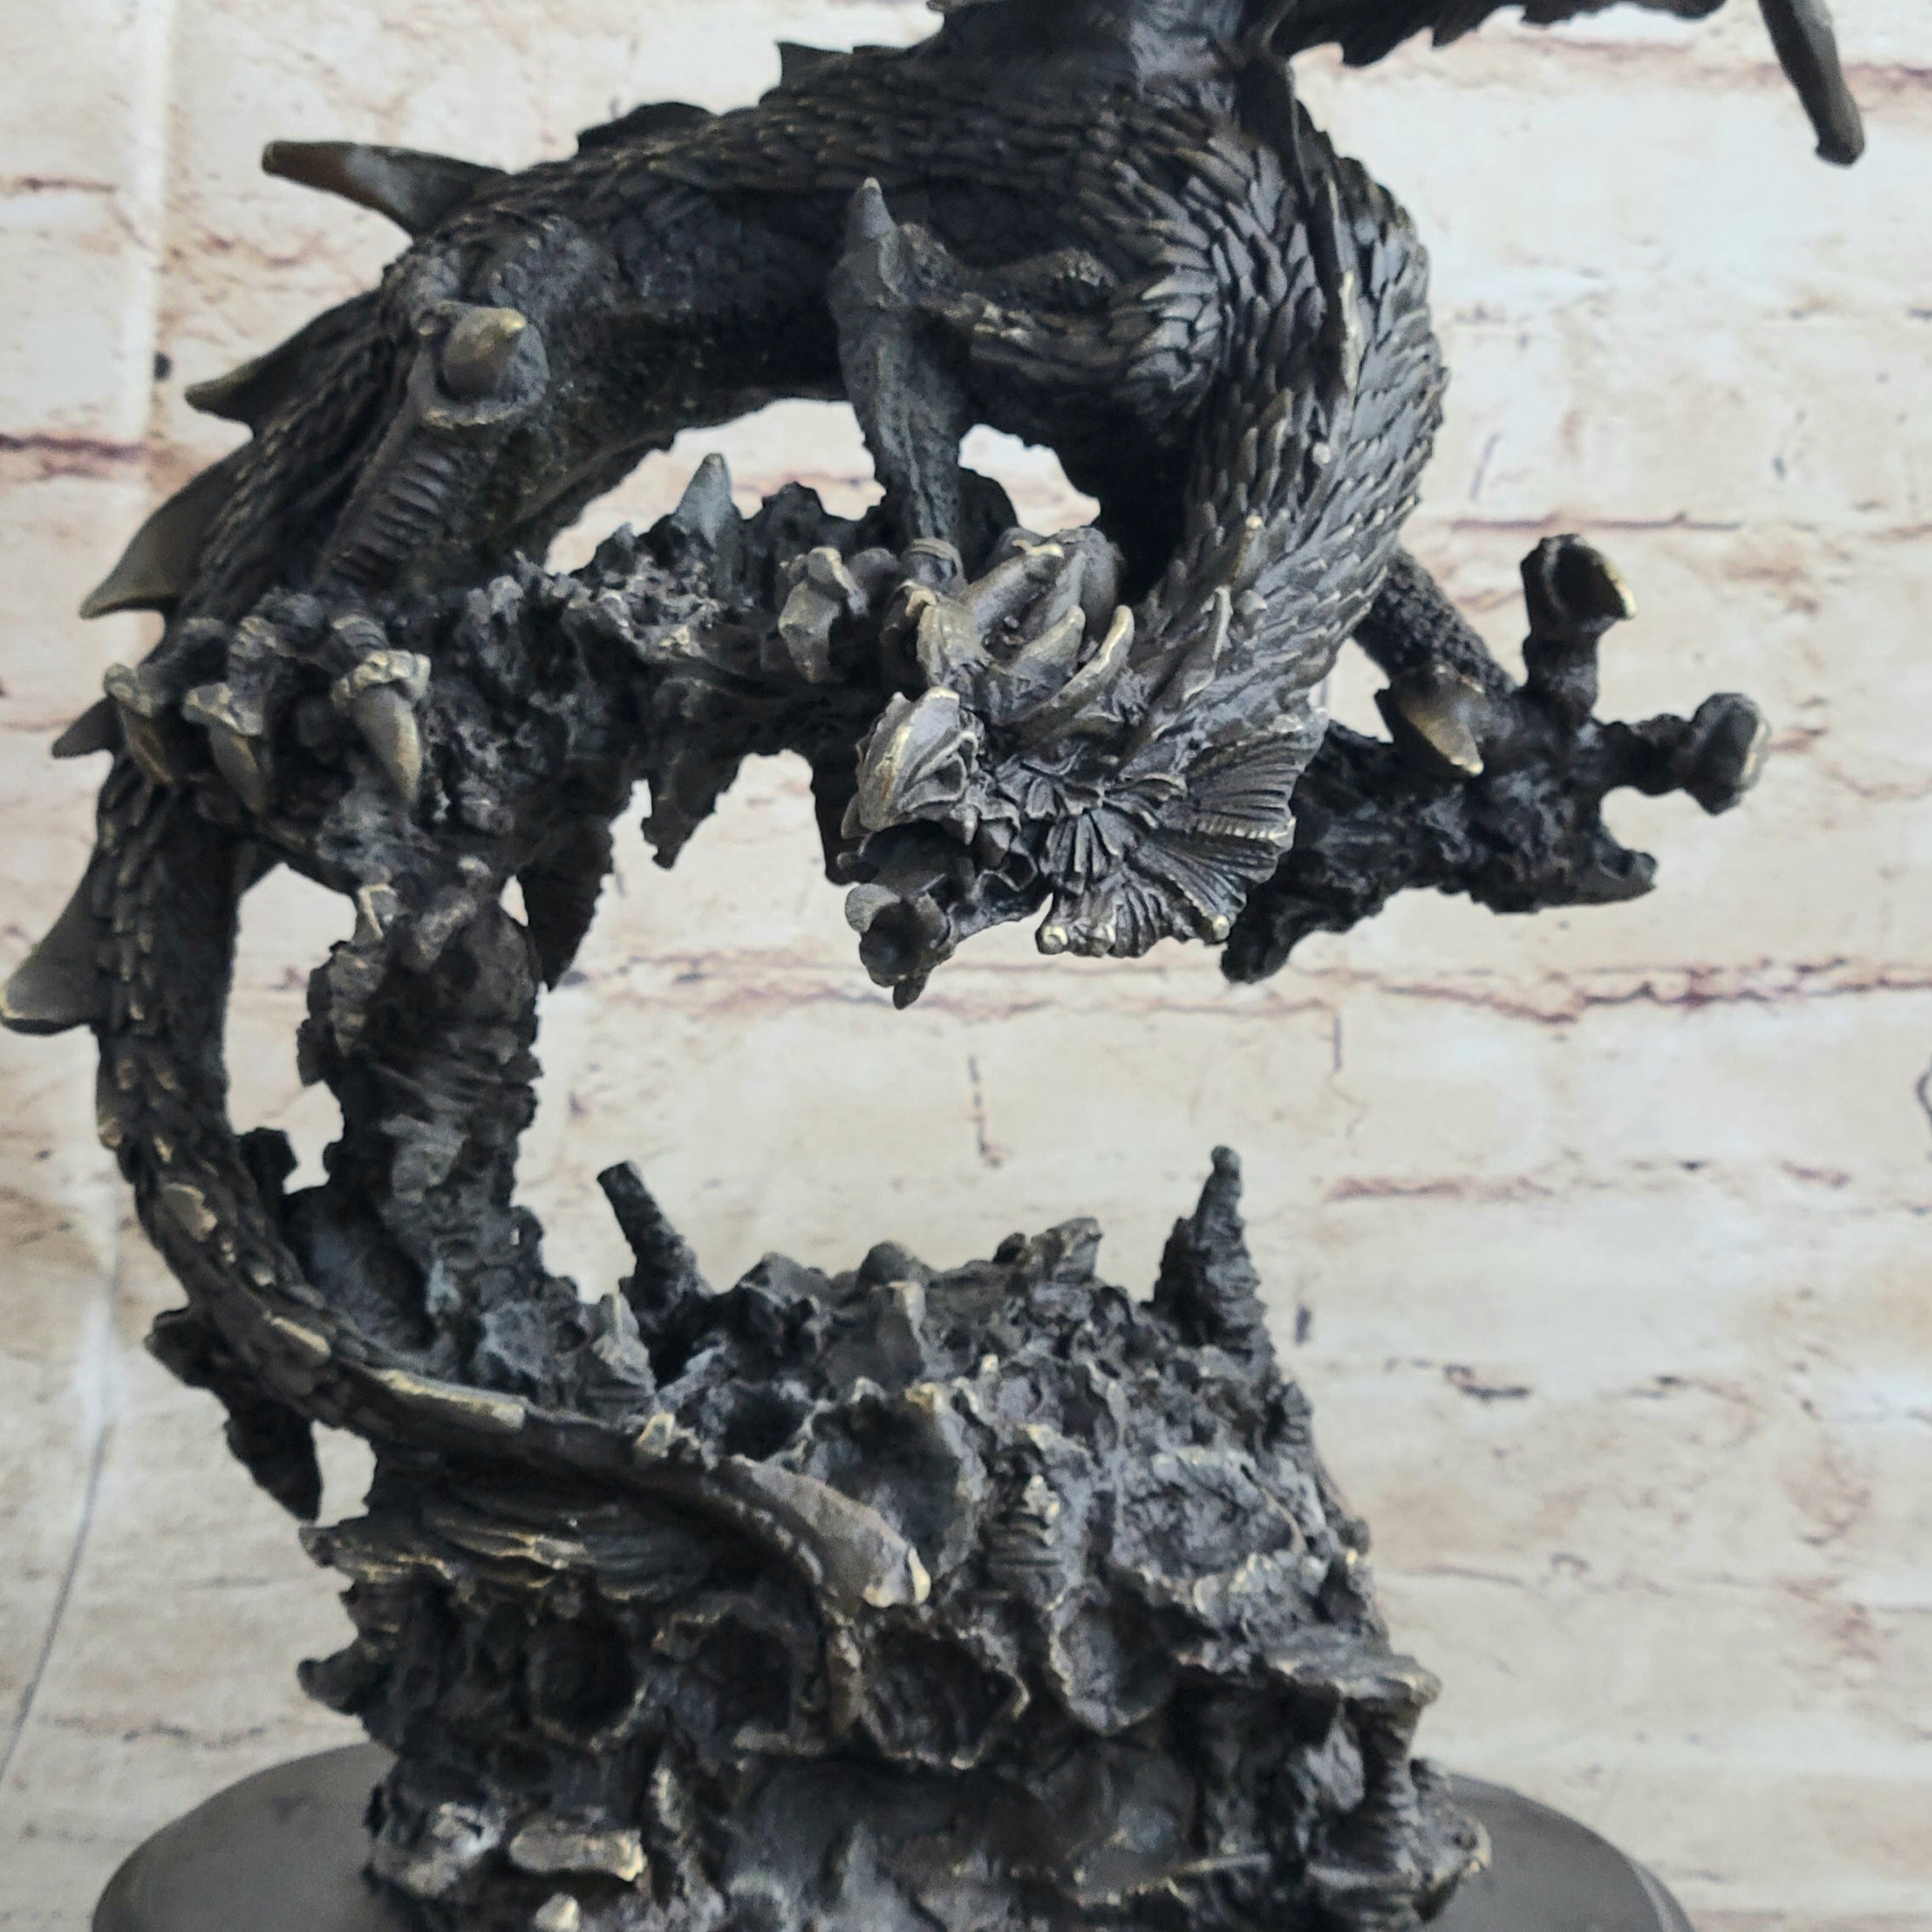 Mythical Creature Sculptures